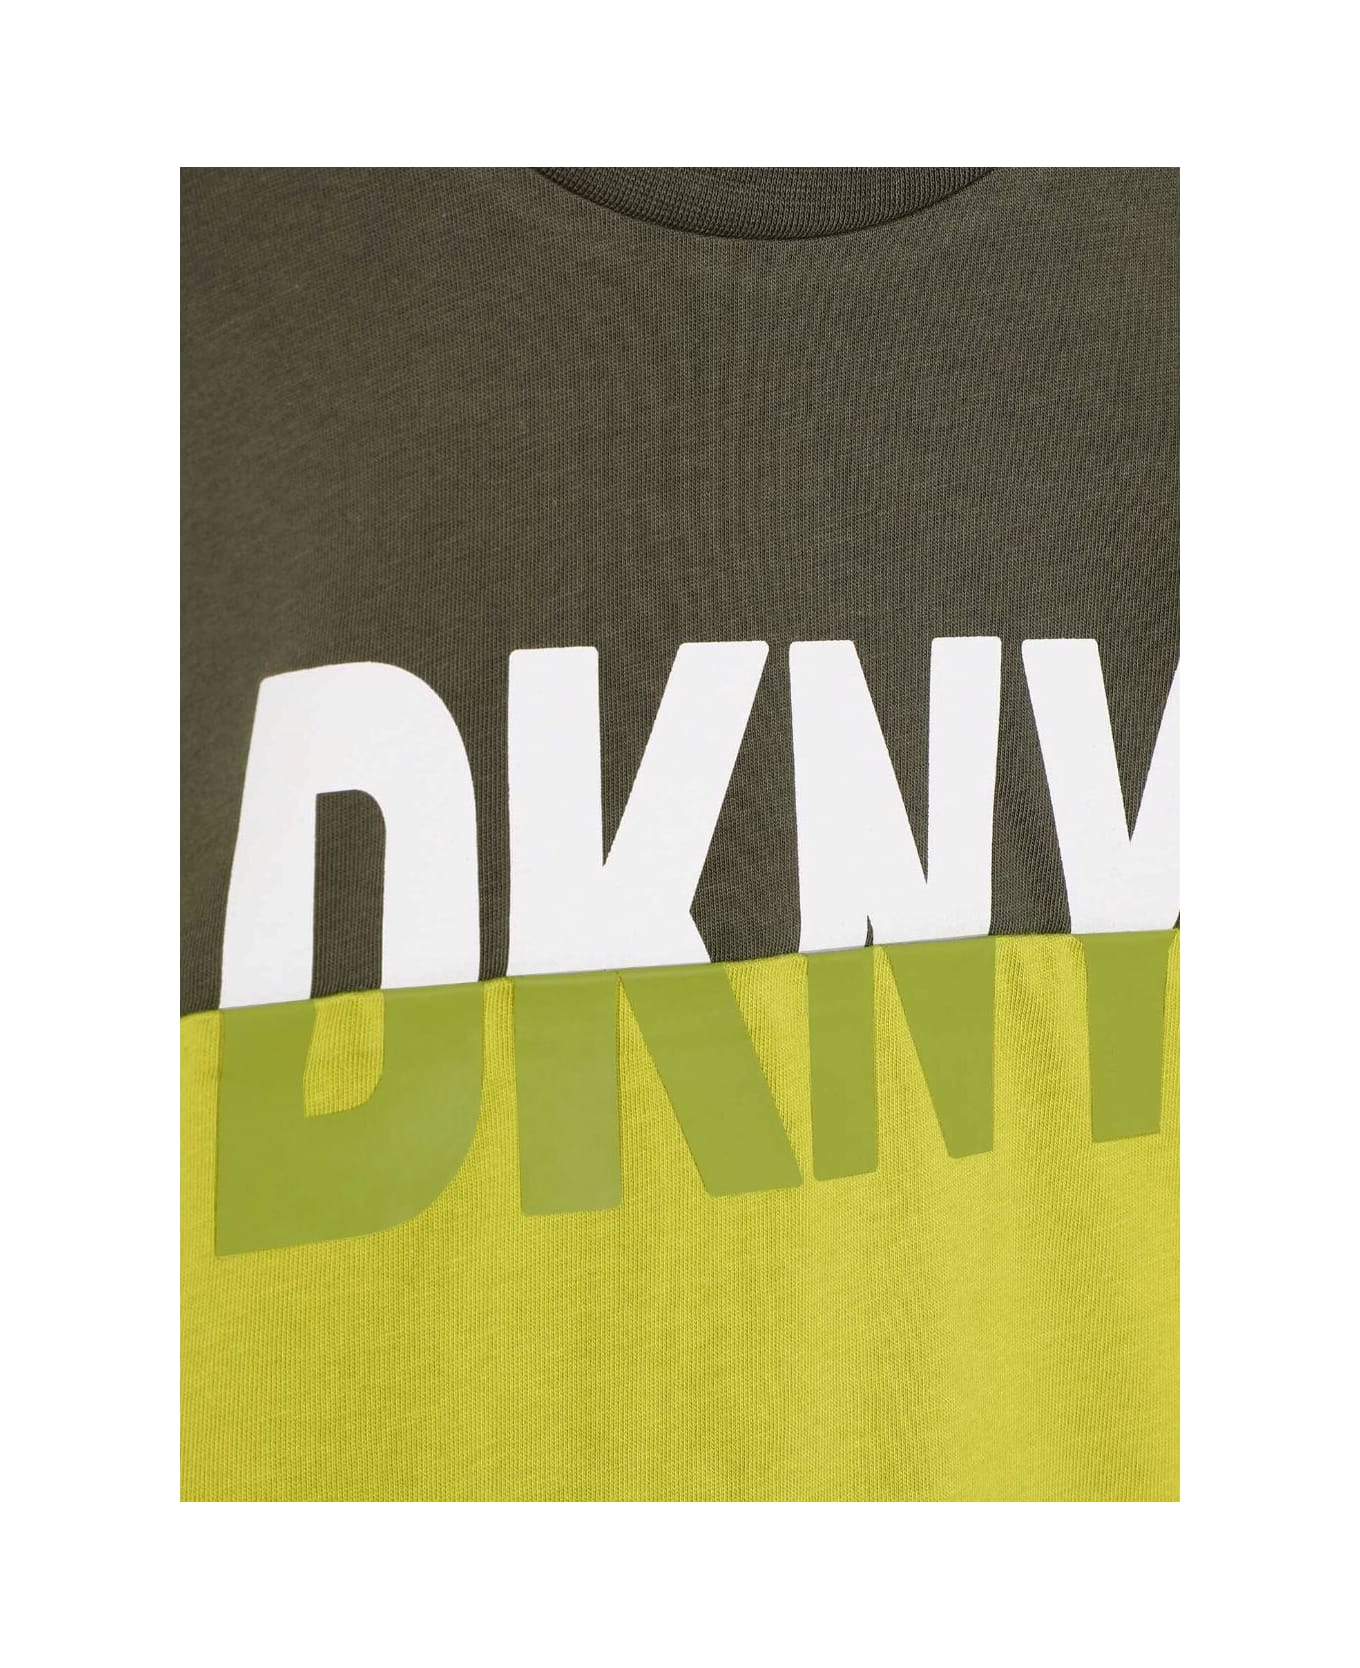 DKNY T-shirt Verde Con Pannelli A Contrasto Bambino - Verde Tシャツ＆ポロシャツ